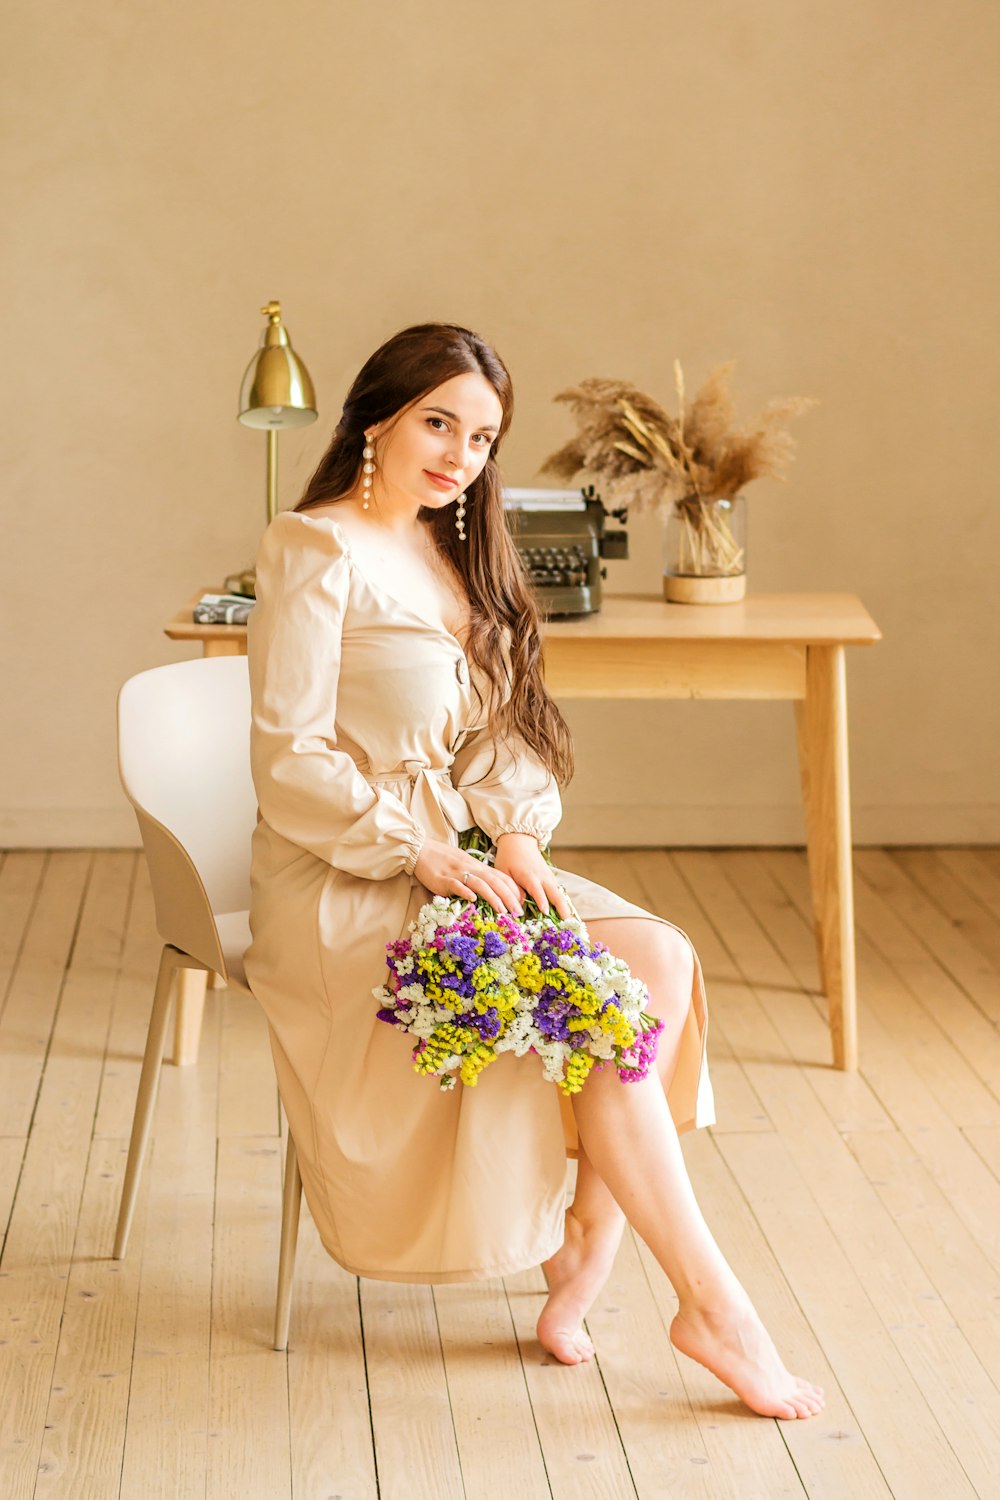 barefooted woman wearing white long-sleeved dress sitting on chair near rectangular beige wooden table